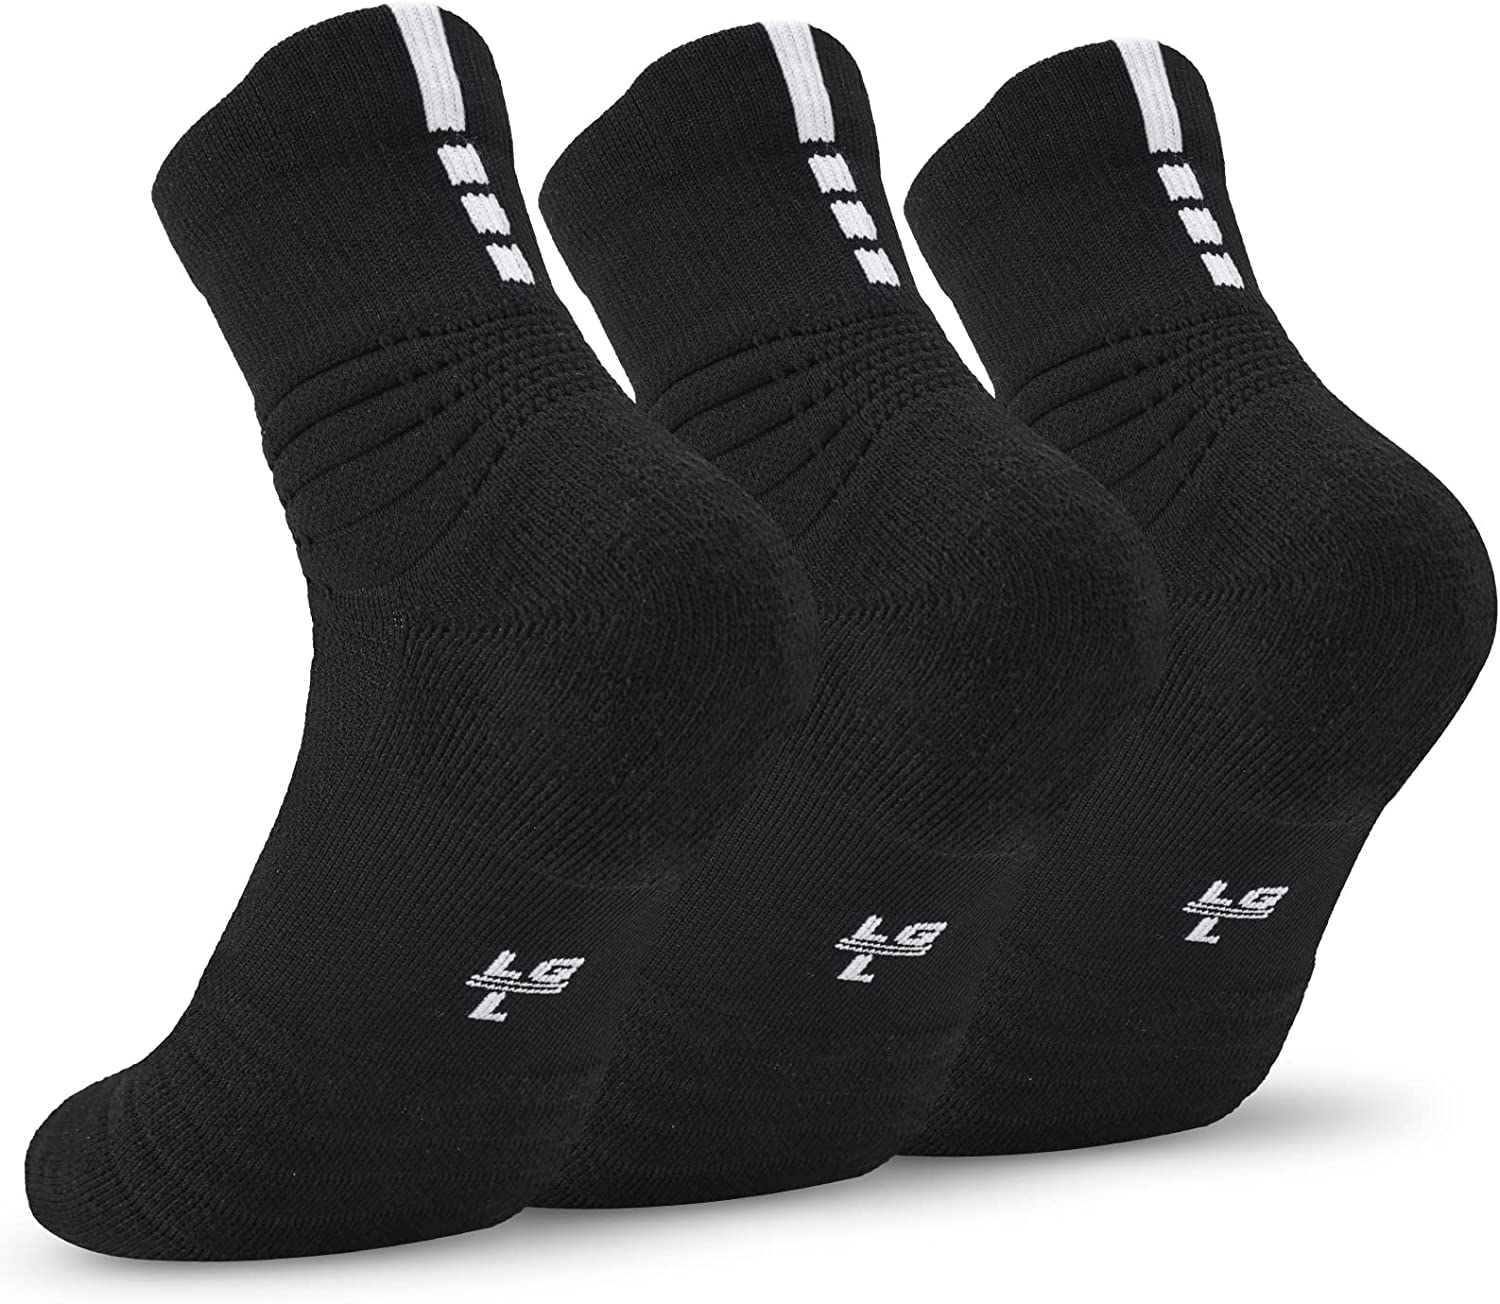 Bloemlezing bijstand Goneryl Buy Elite Basketball Socks Cushioned Athletic Sports Crew Socks for Men and  Women US Size Medium from Japan - Buy authentic Plus exclusive items from  Japan | ZenPlus